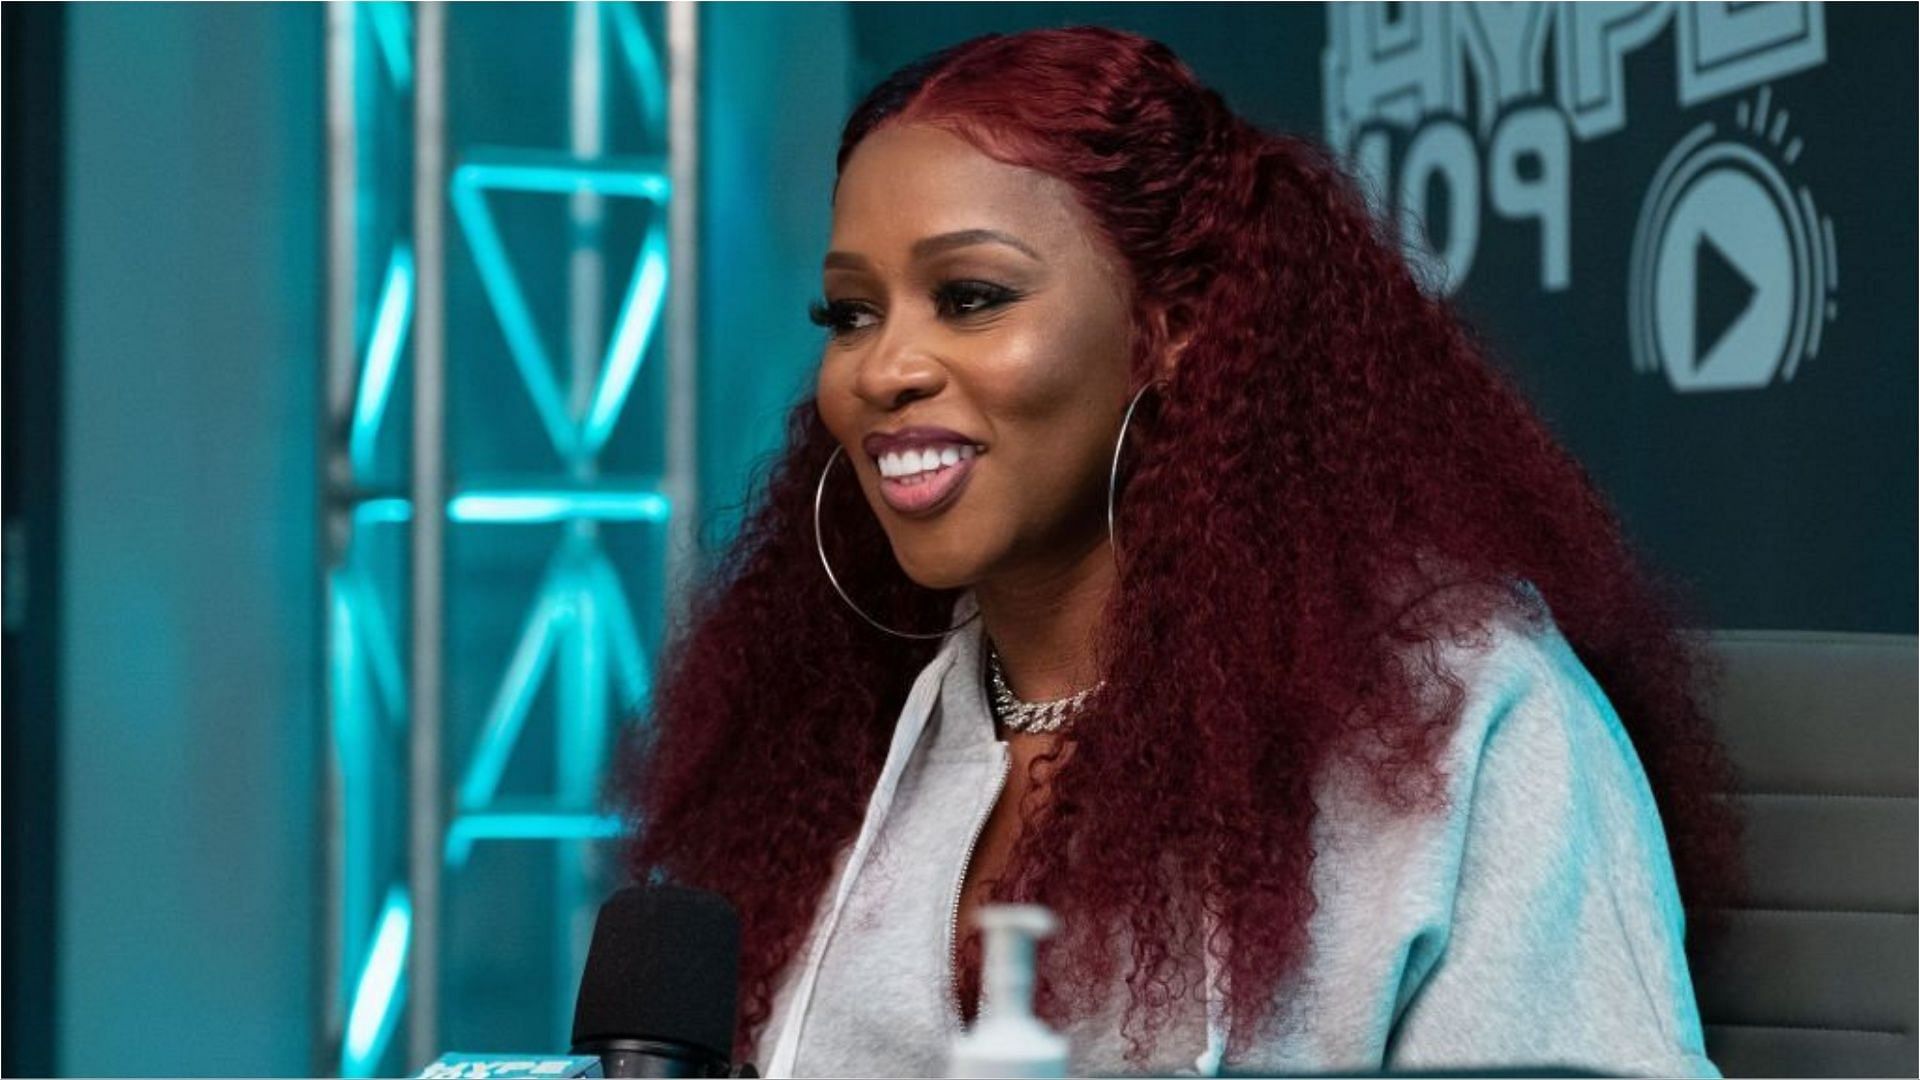 Remy Ma said that she is 35 years old now during her latest birthday party (Image via Wilford Harewood/Getty Images)